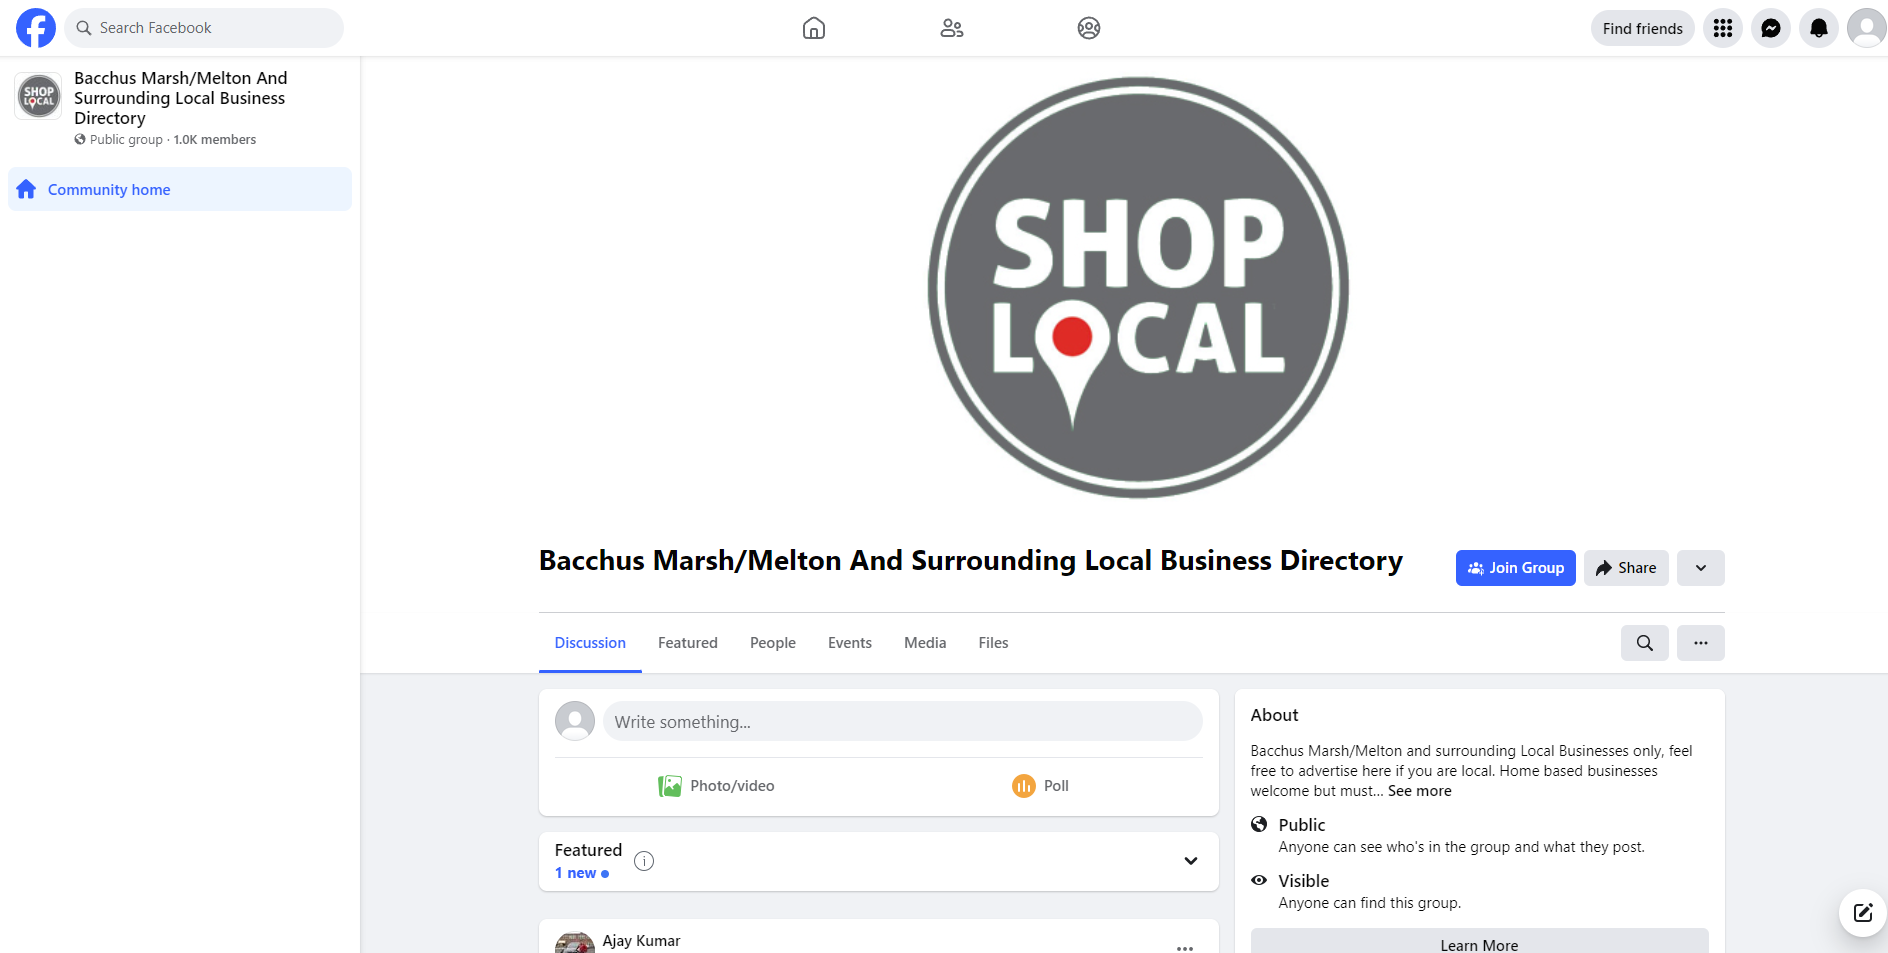 Bacchus Marsh/Melton and Surrounding Local Business Directory